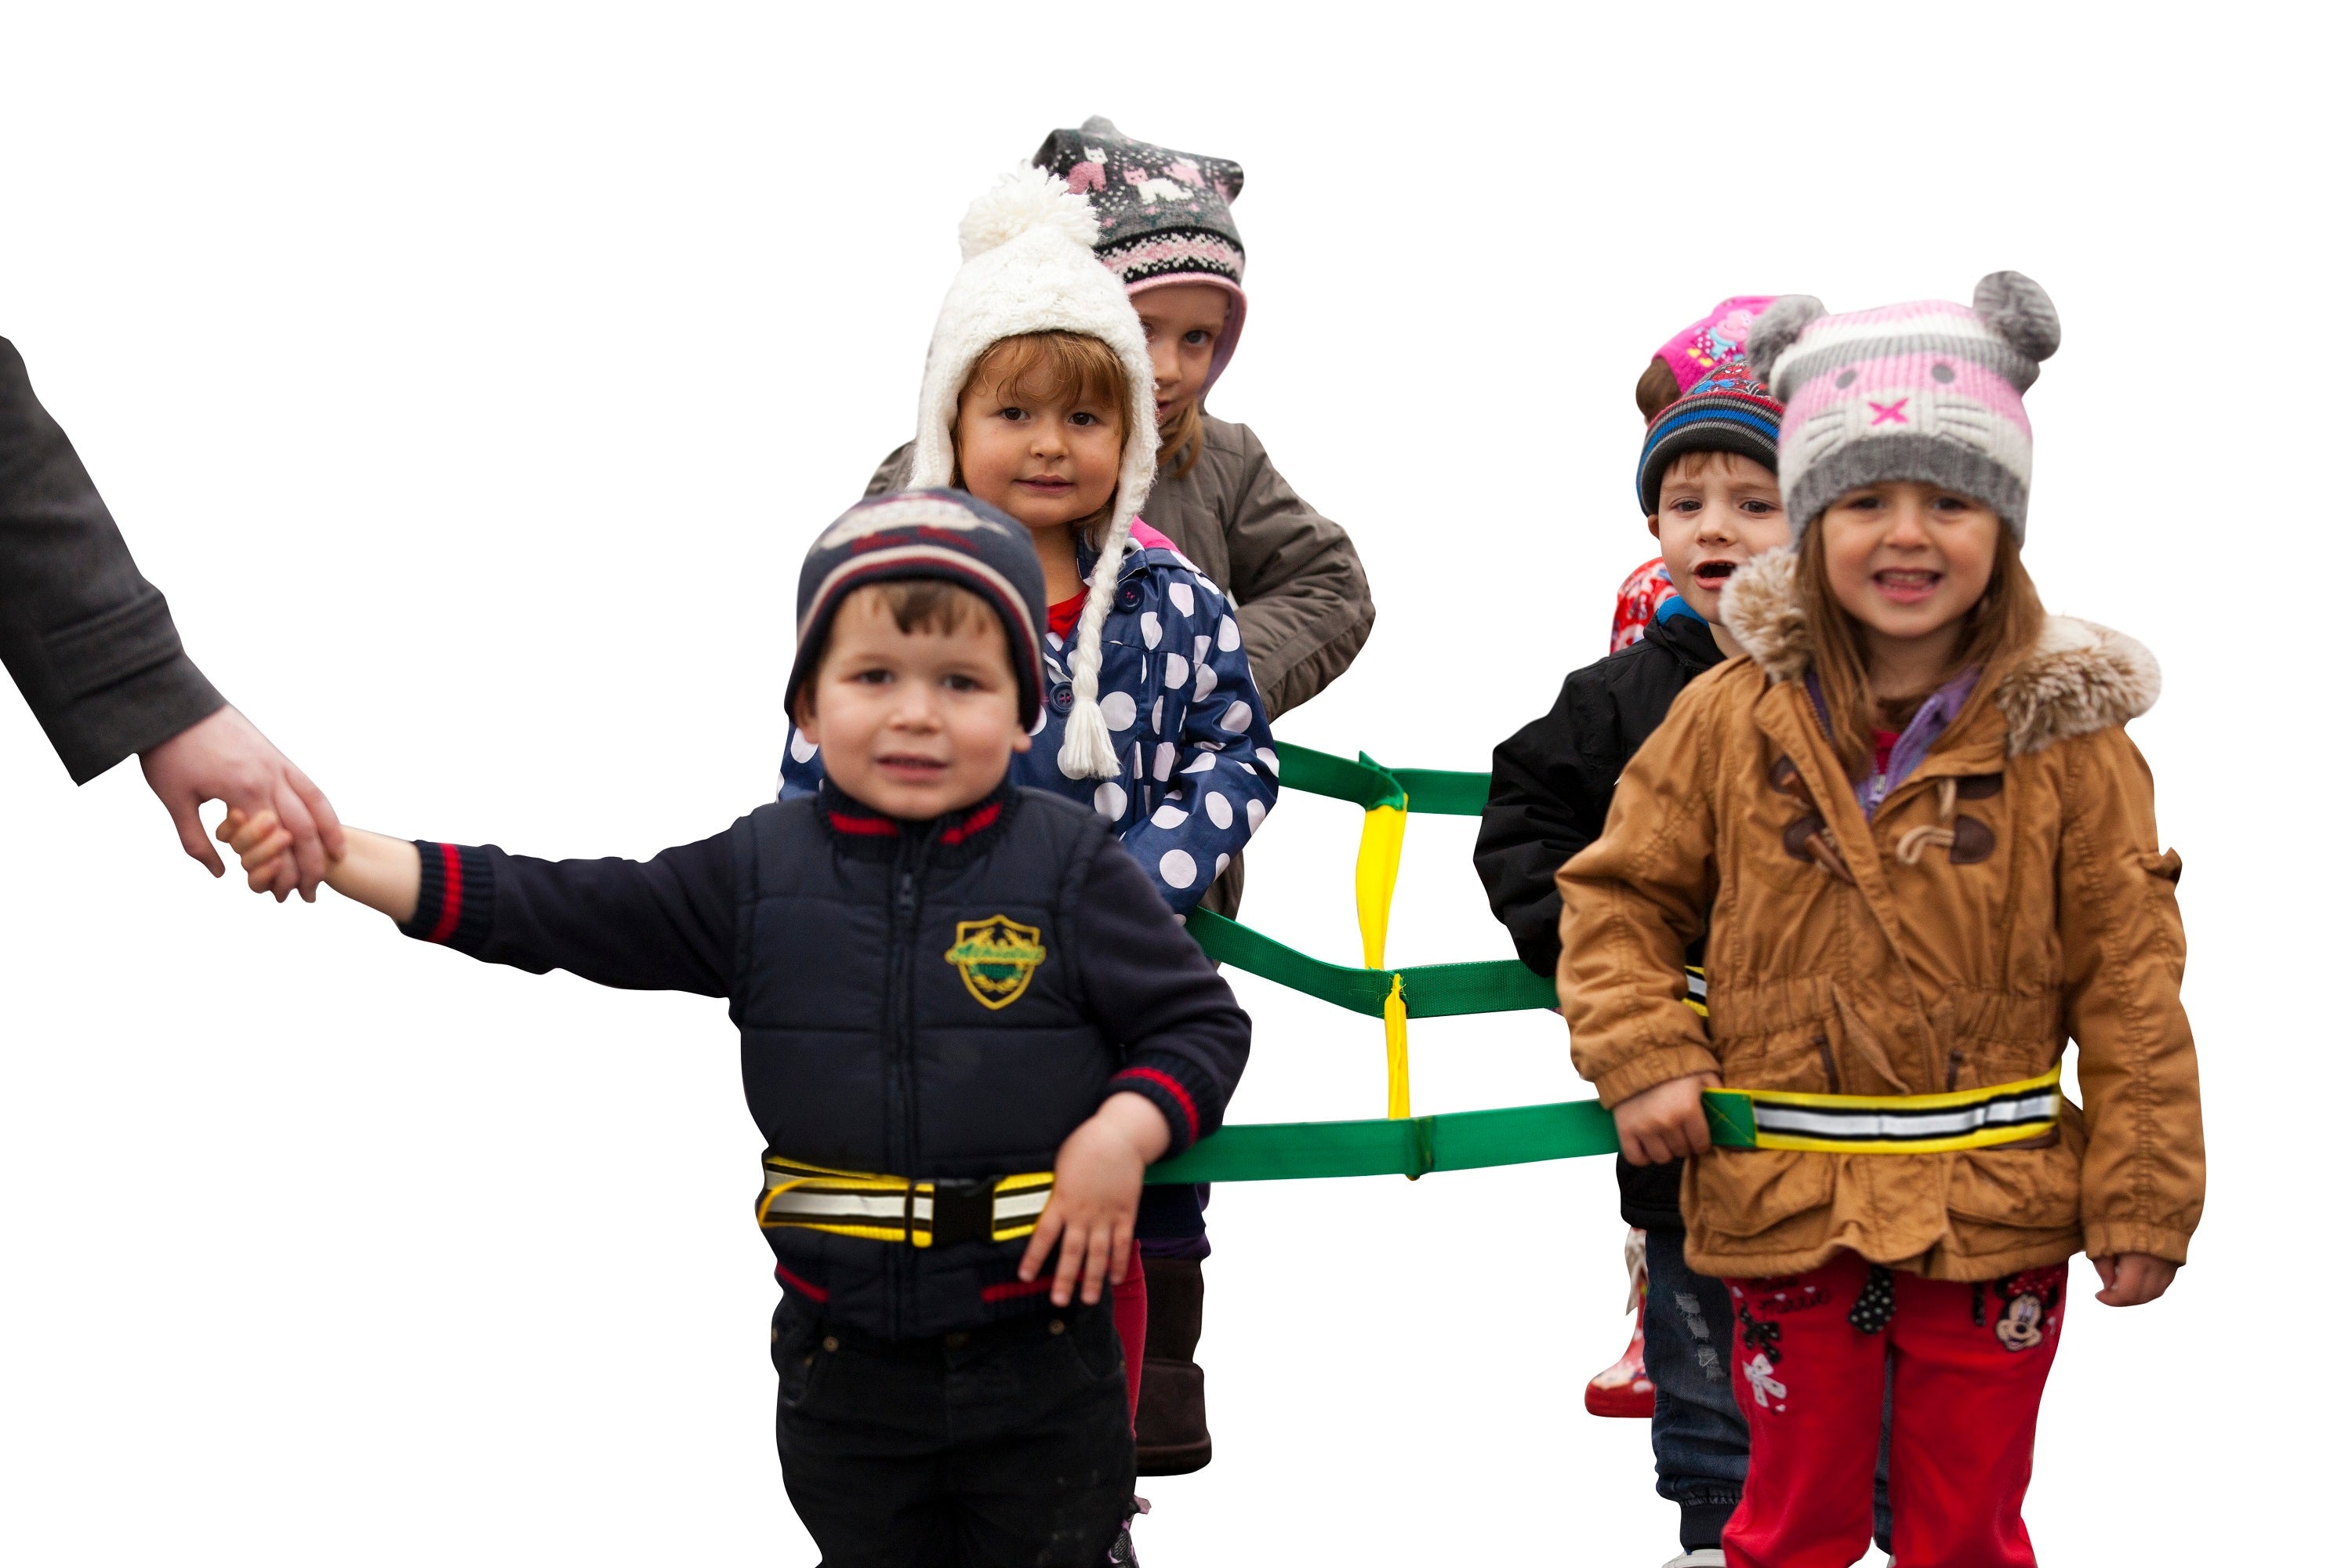 Walkodile Safety Web - the fun, safe walking rope for eight children.